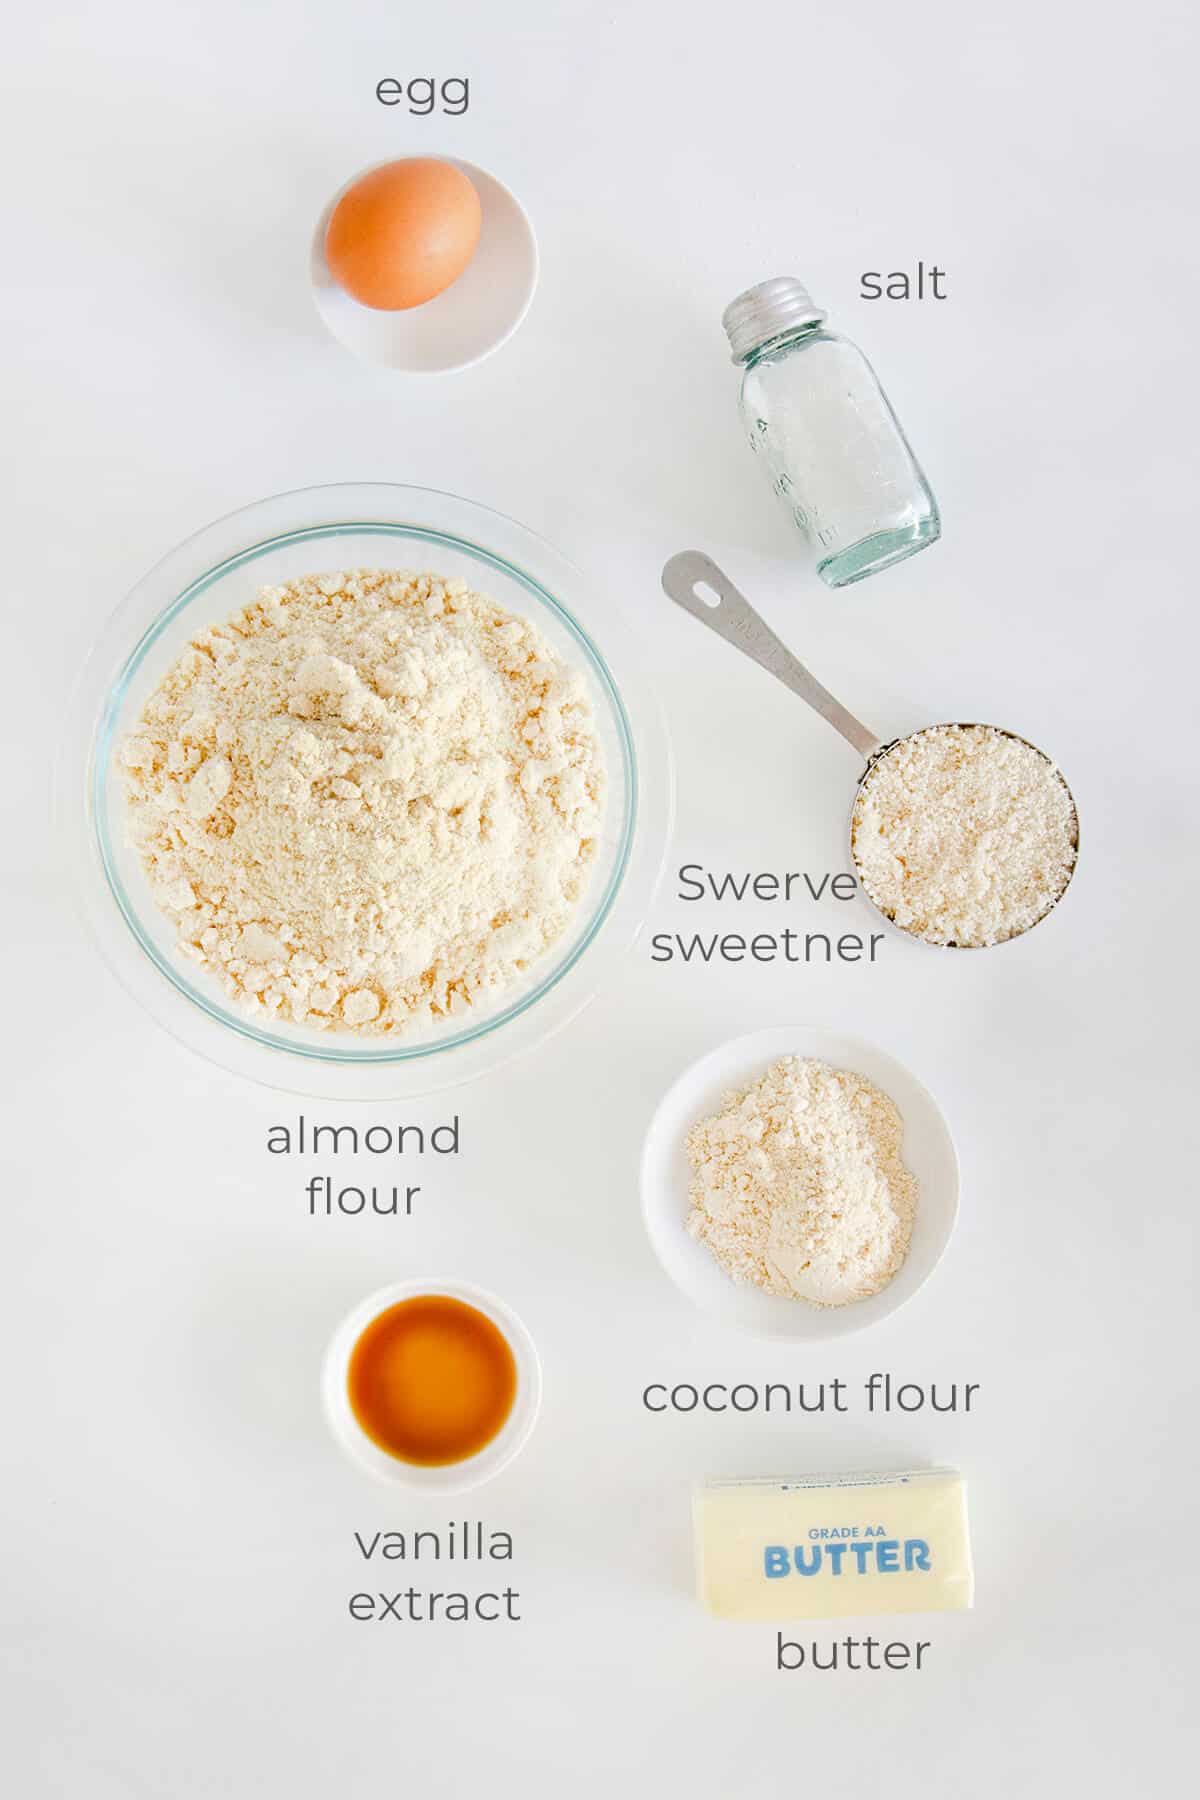 Ingredients labeled and needed to make keto sugar cookies